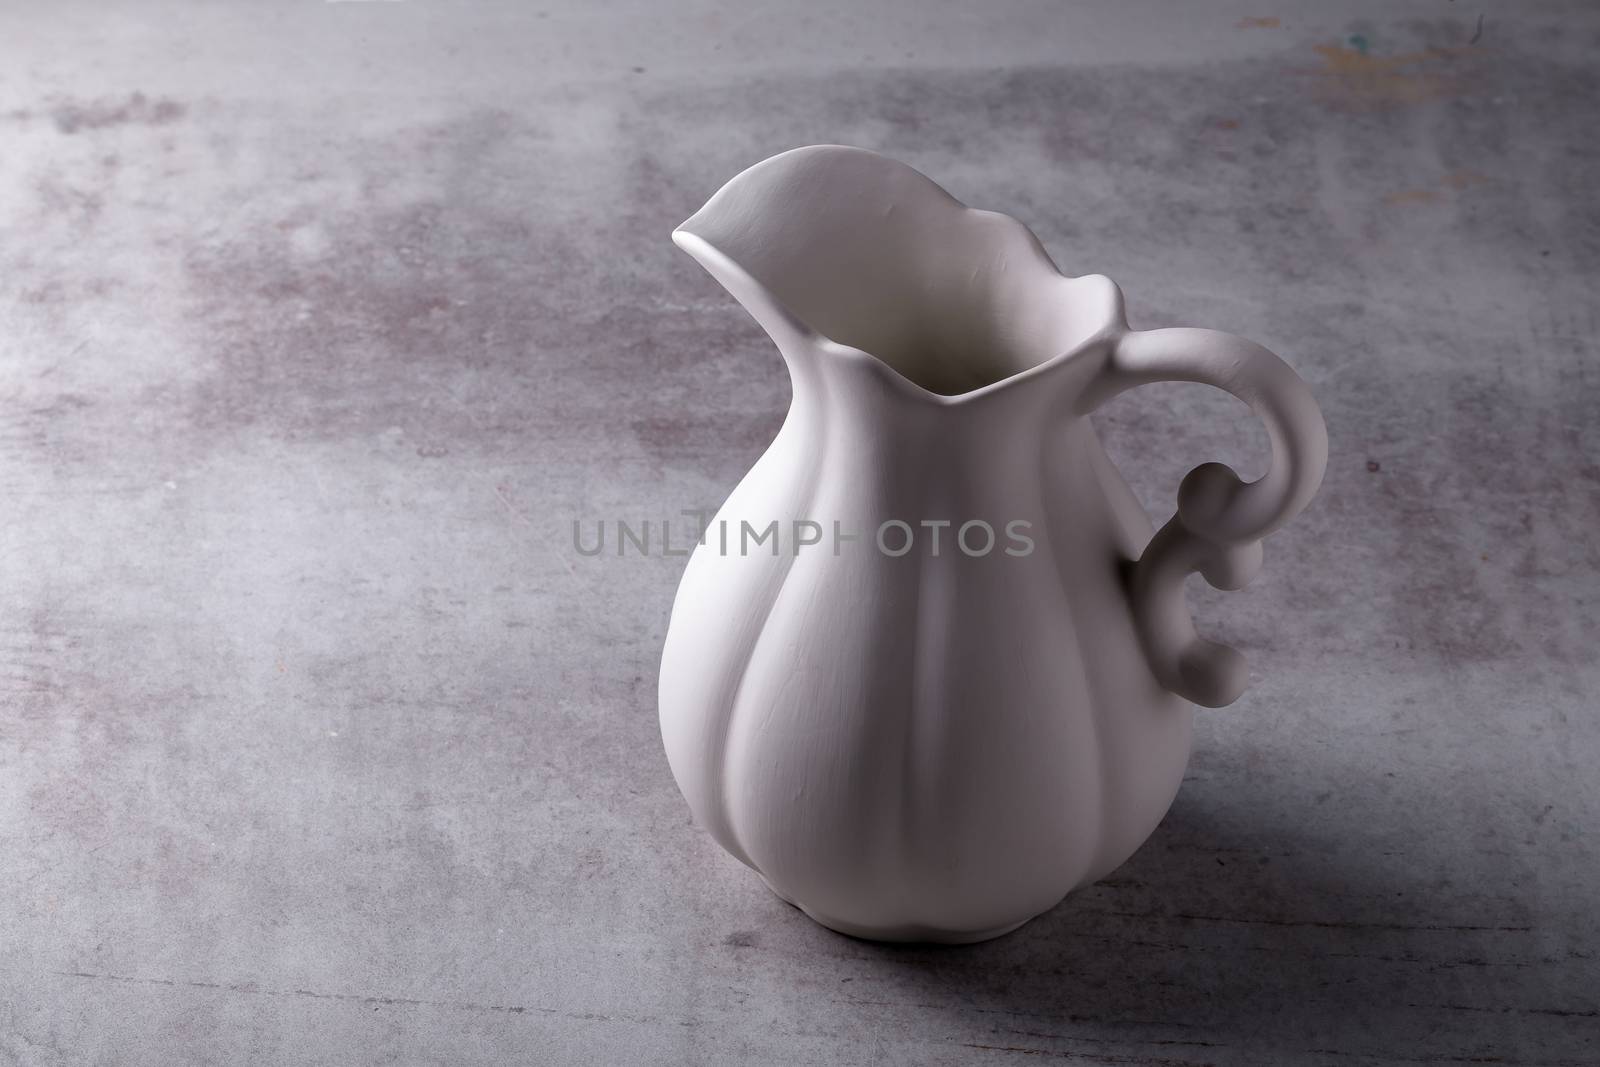 Teapot creamer, Cup and saucer on Cement Board.